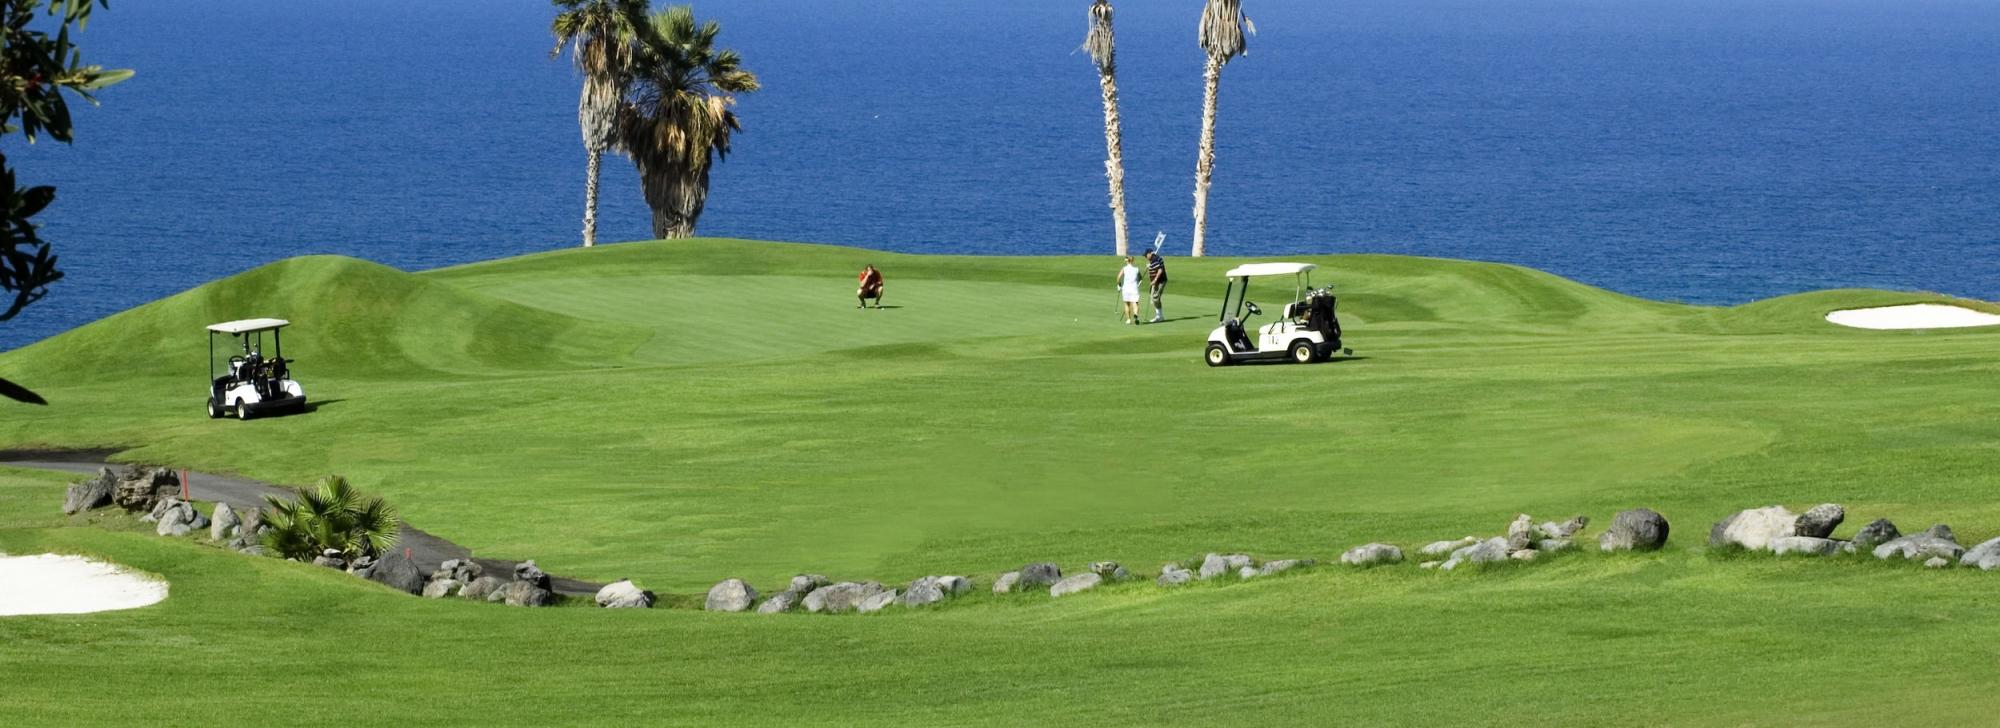 The Costa Adeje Golf Course's lovely golf course in marvelous Tenerife.